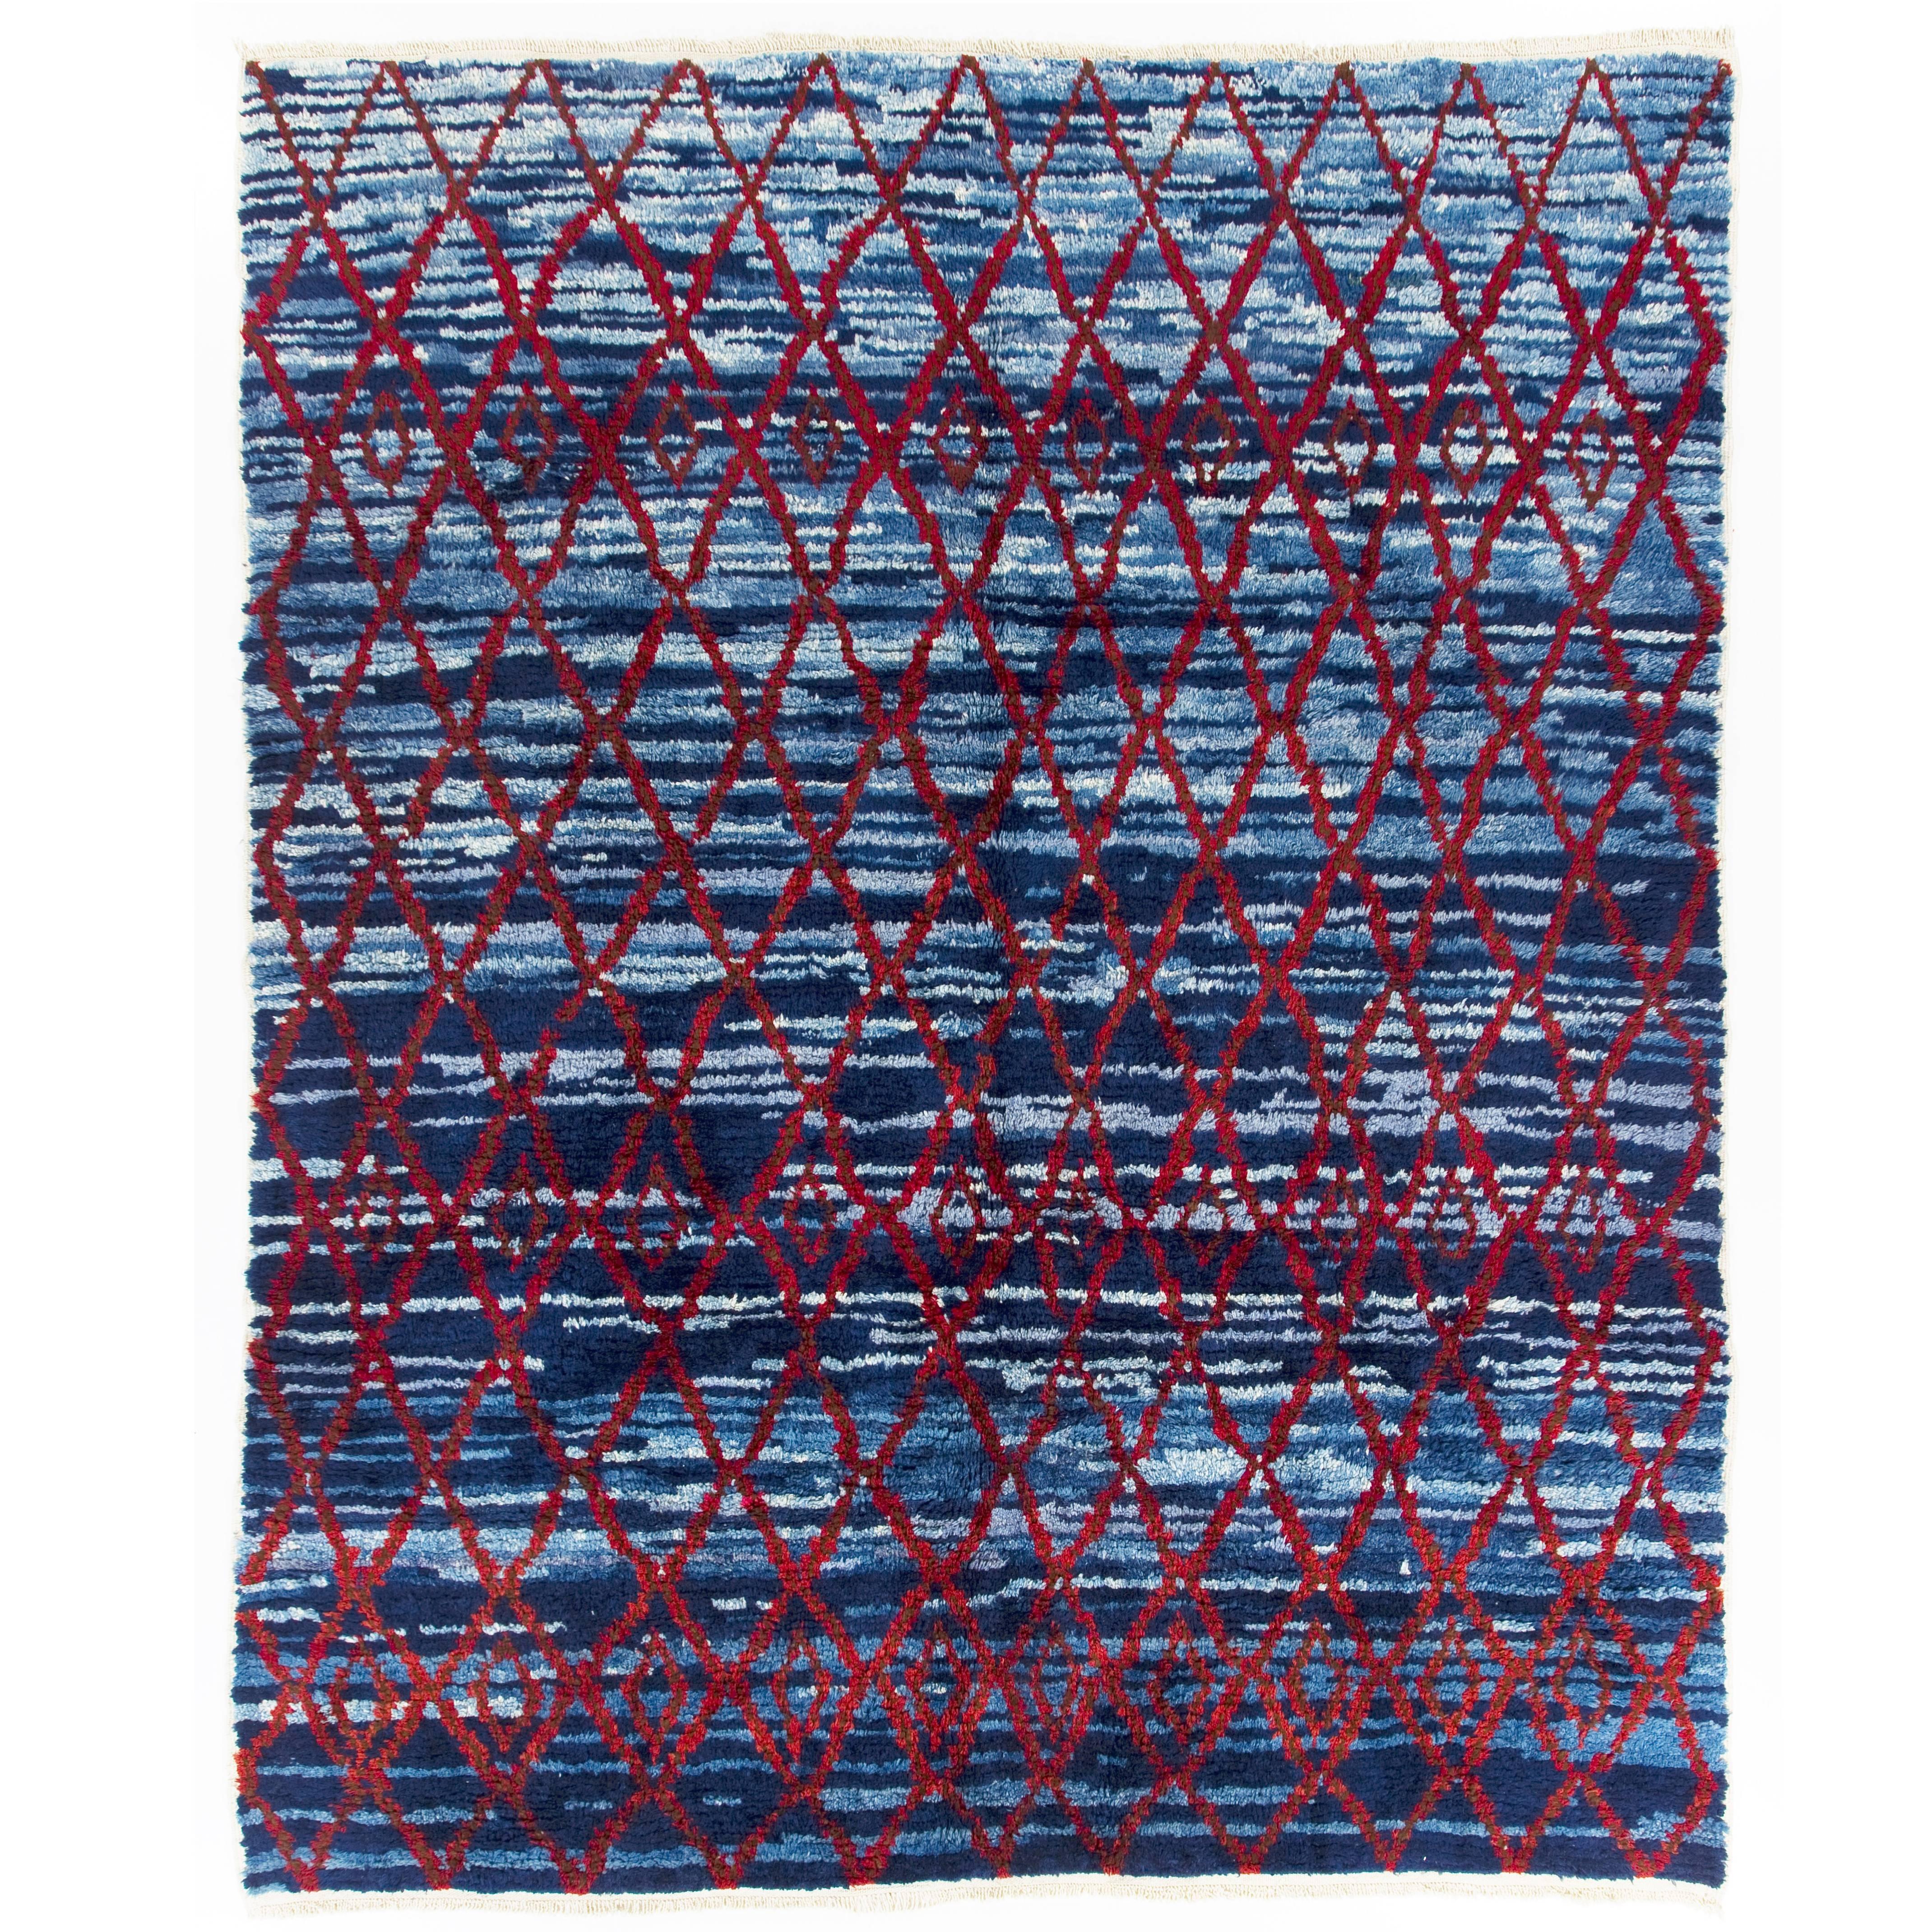 Modern Handmade Moroccan Rug in Blue & Red. 100% Wool. Custom Options Available